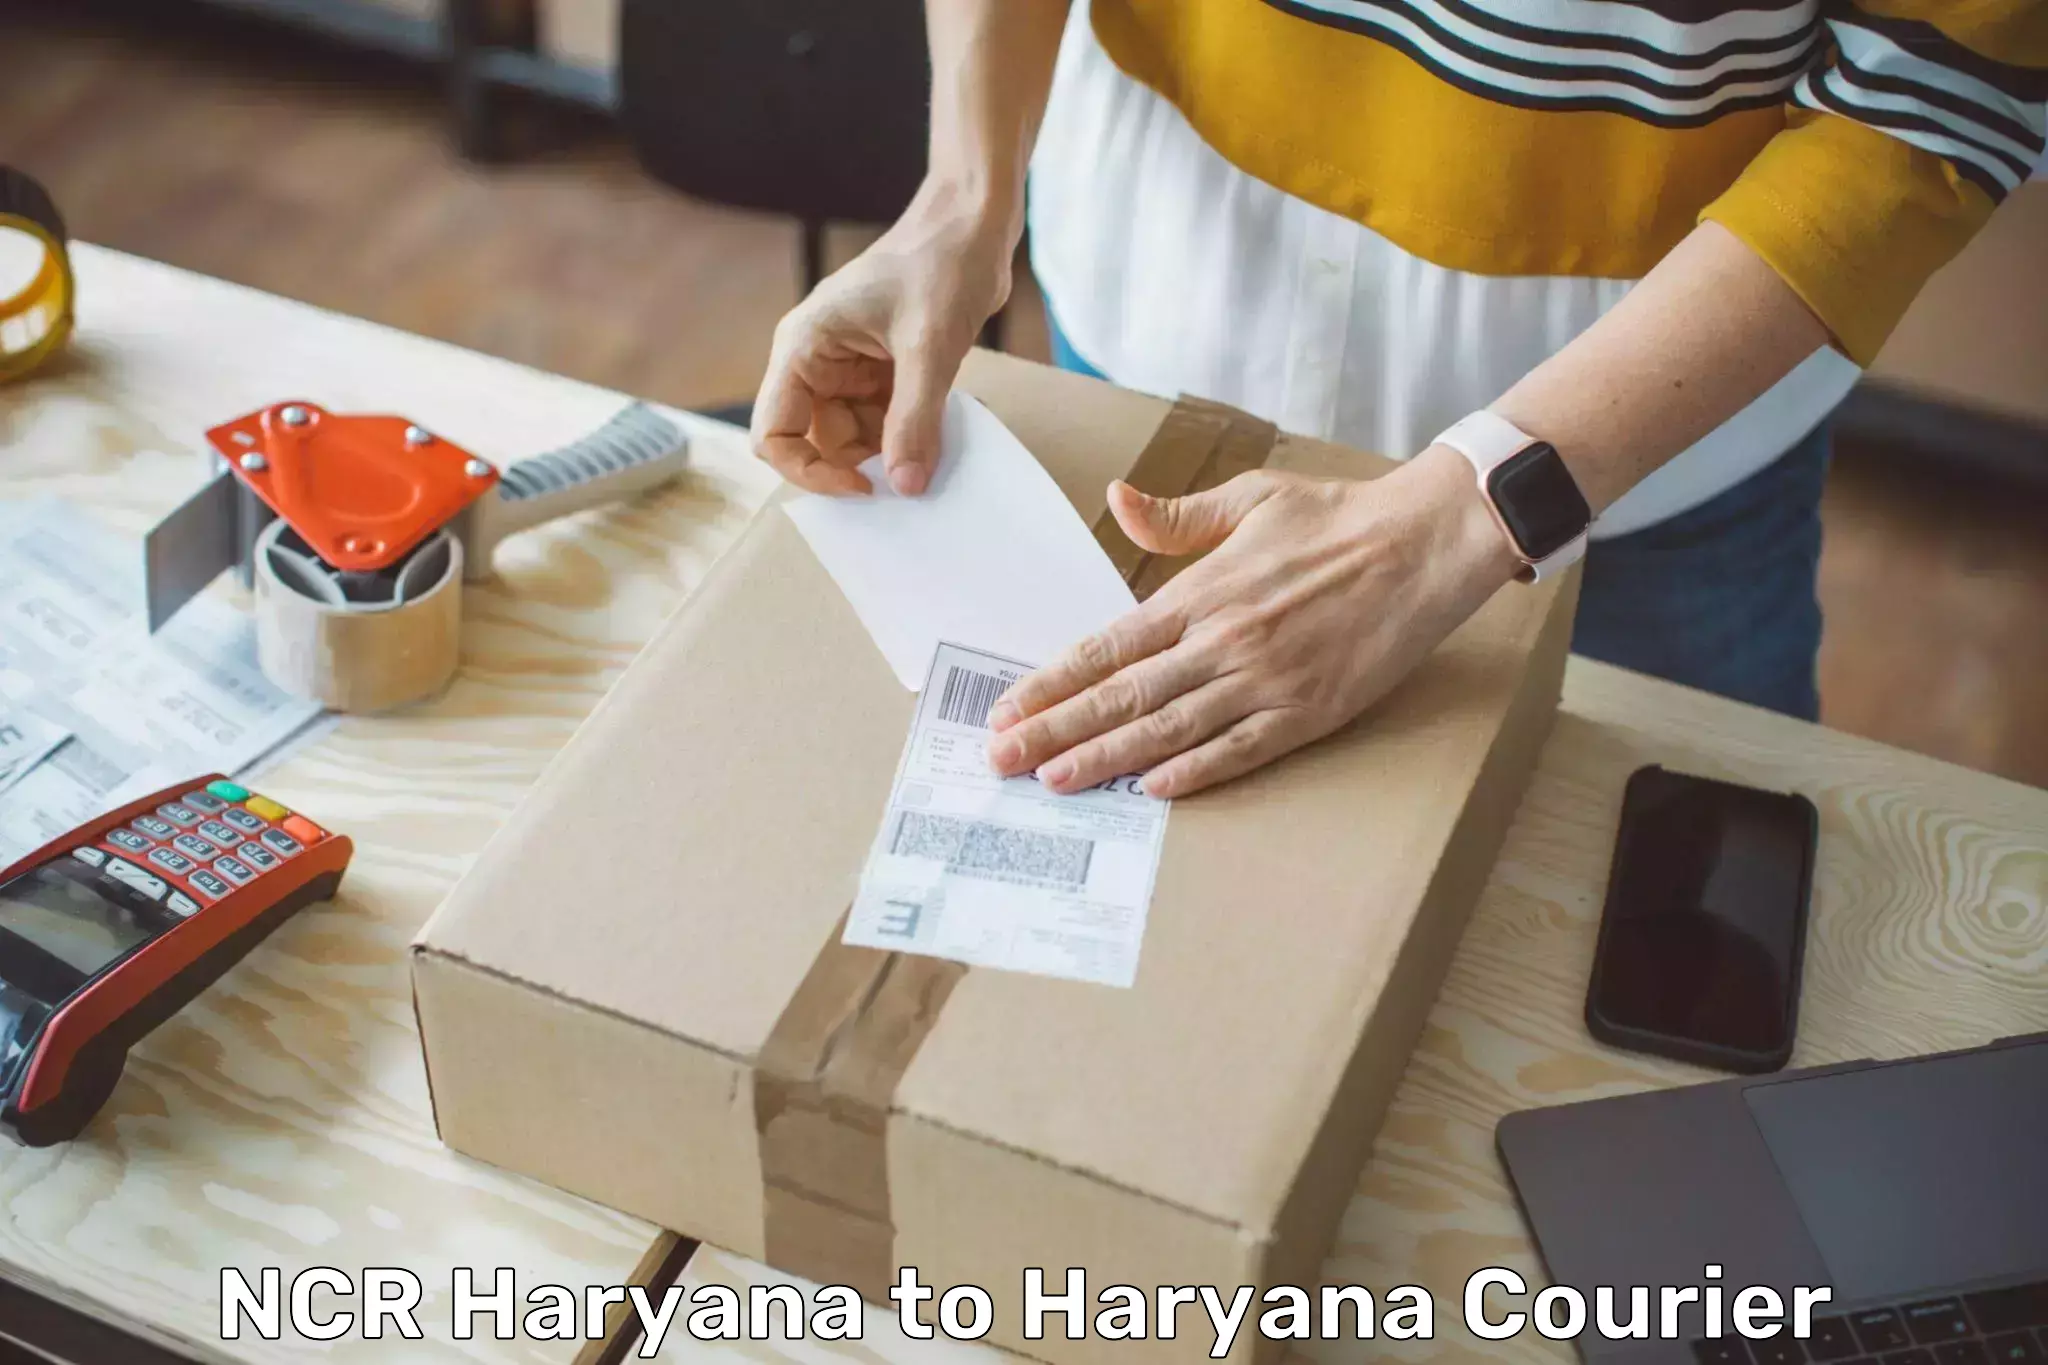 Courier service comparison in NCR Haryana to Ambala